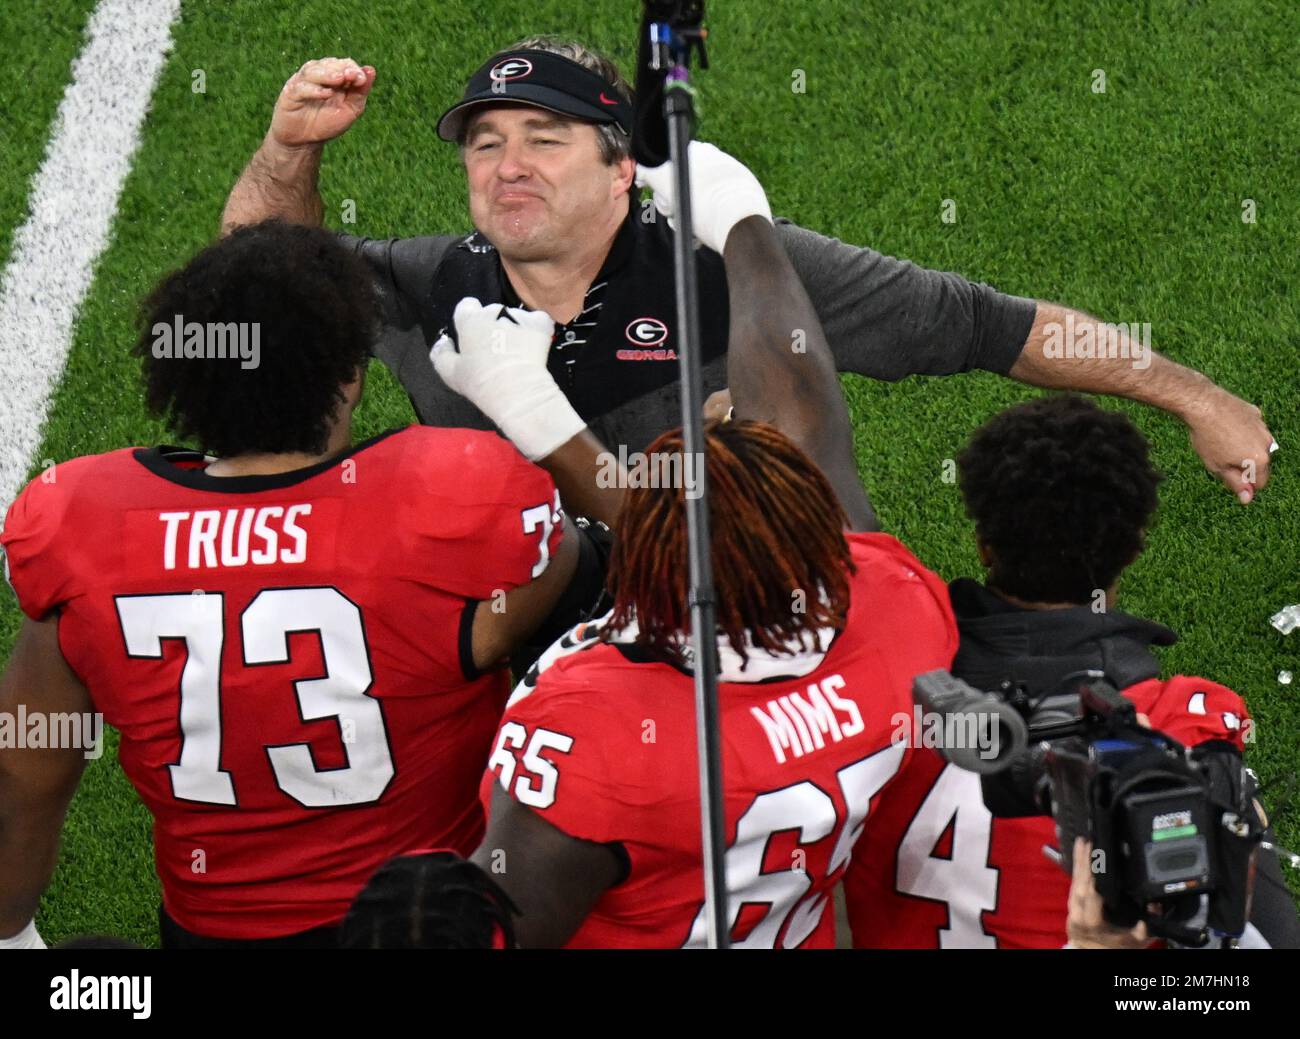 Inglewood, United States. 09th Jan, 2023. Georgia head coach Kirby Smart celebrates after the Bulldogs defeated the TCU Horned Frogs 65-7 in the 2023 NCAA College Football National Championship at SoFi Stadium in Inglewood, California, on Monday, January 9, 2023. Photo by Jon SooHoo/UPI Credit: UPI/Alamy Live News Stock Photo